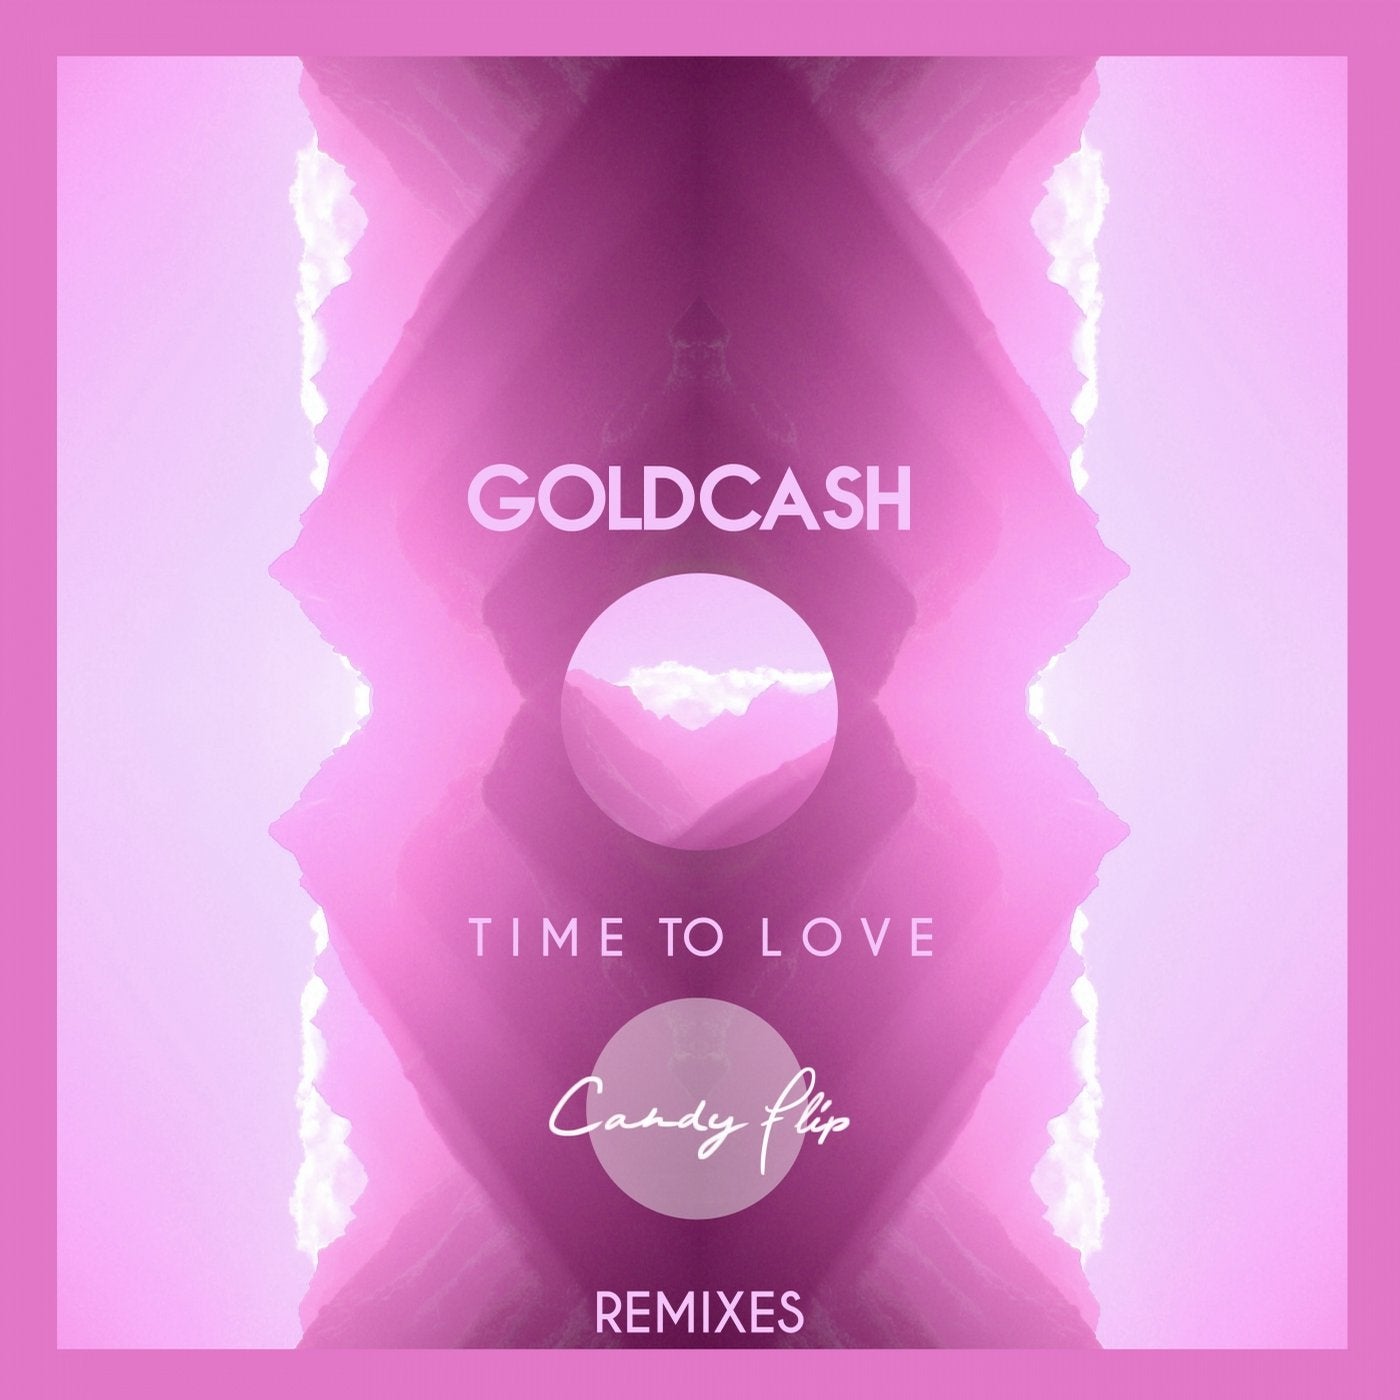 In and out of love remix. Time to Love. To Love re. Lovely песня ремикс. Candy Remix.